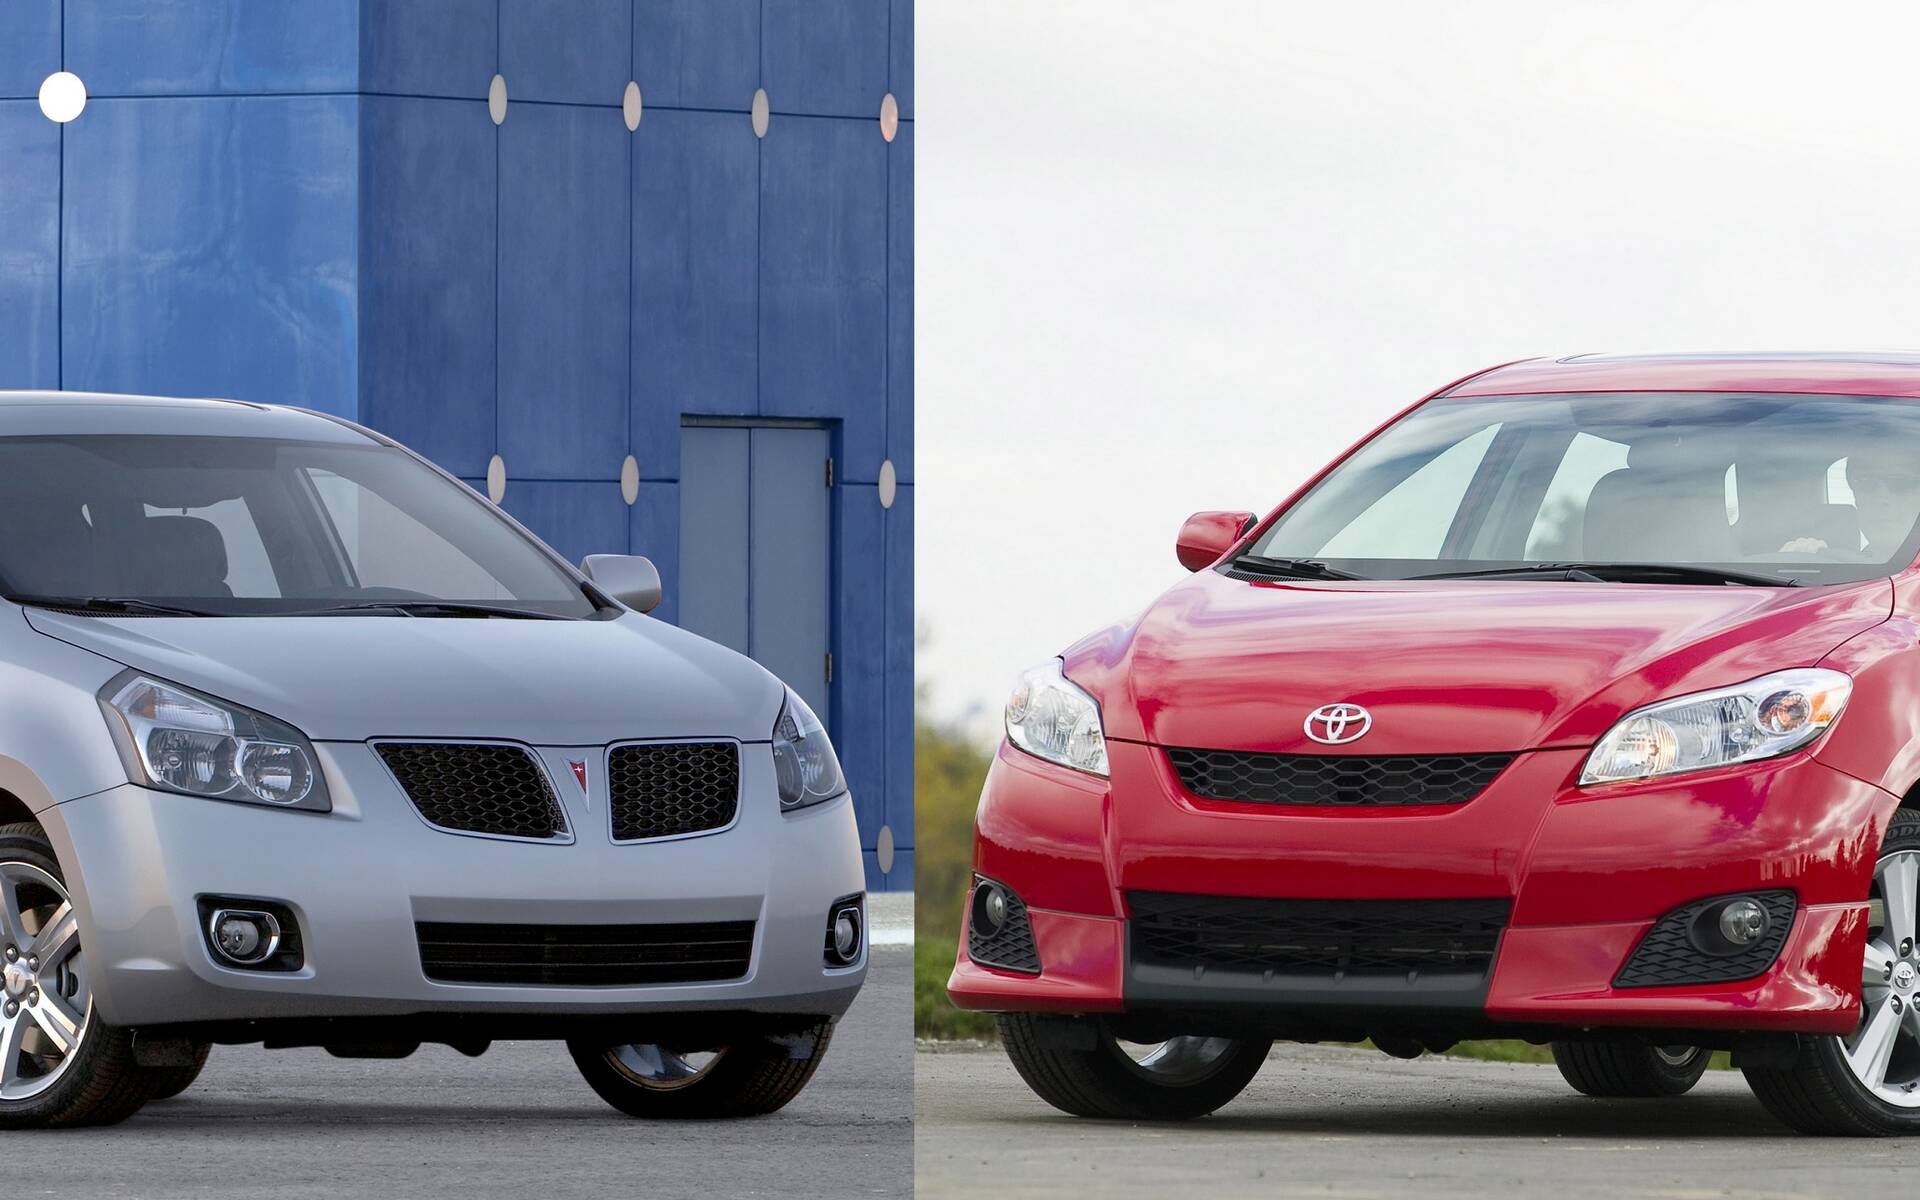 Pontiac Vibe and Toyota Matrix: Are They the Same Car? - The Car Guide